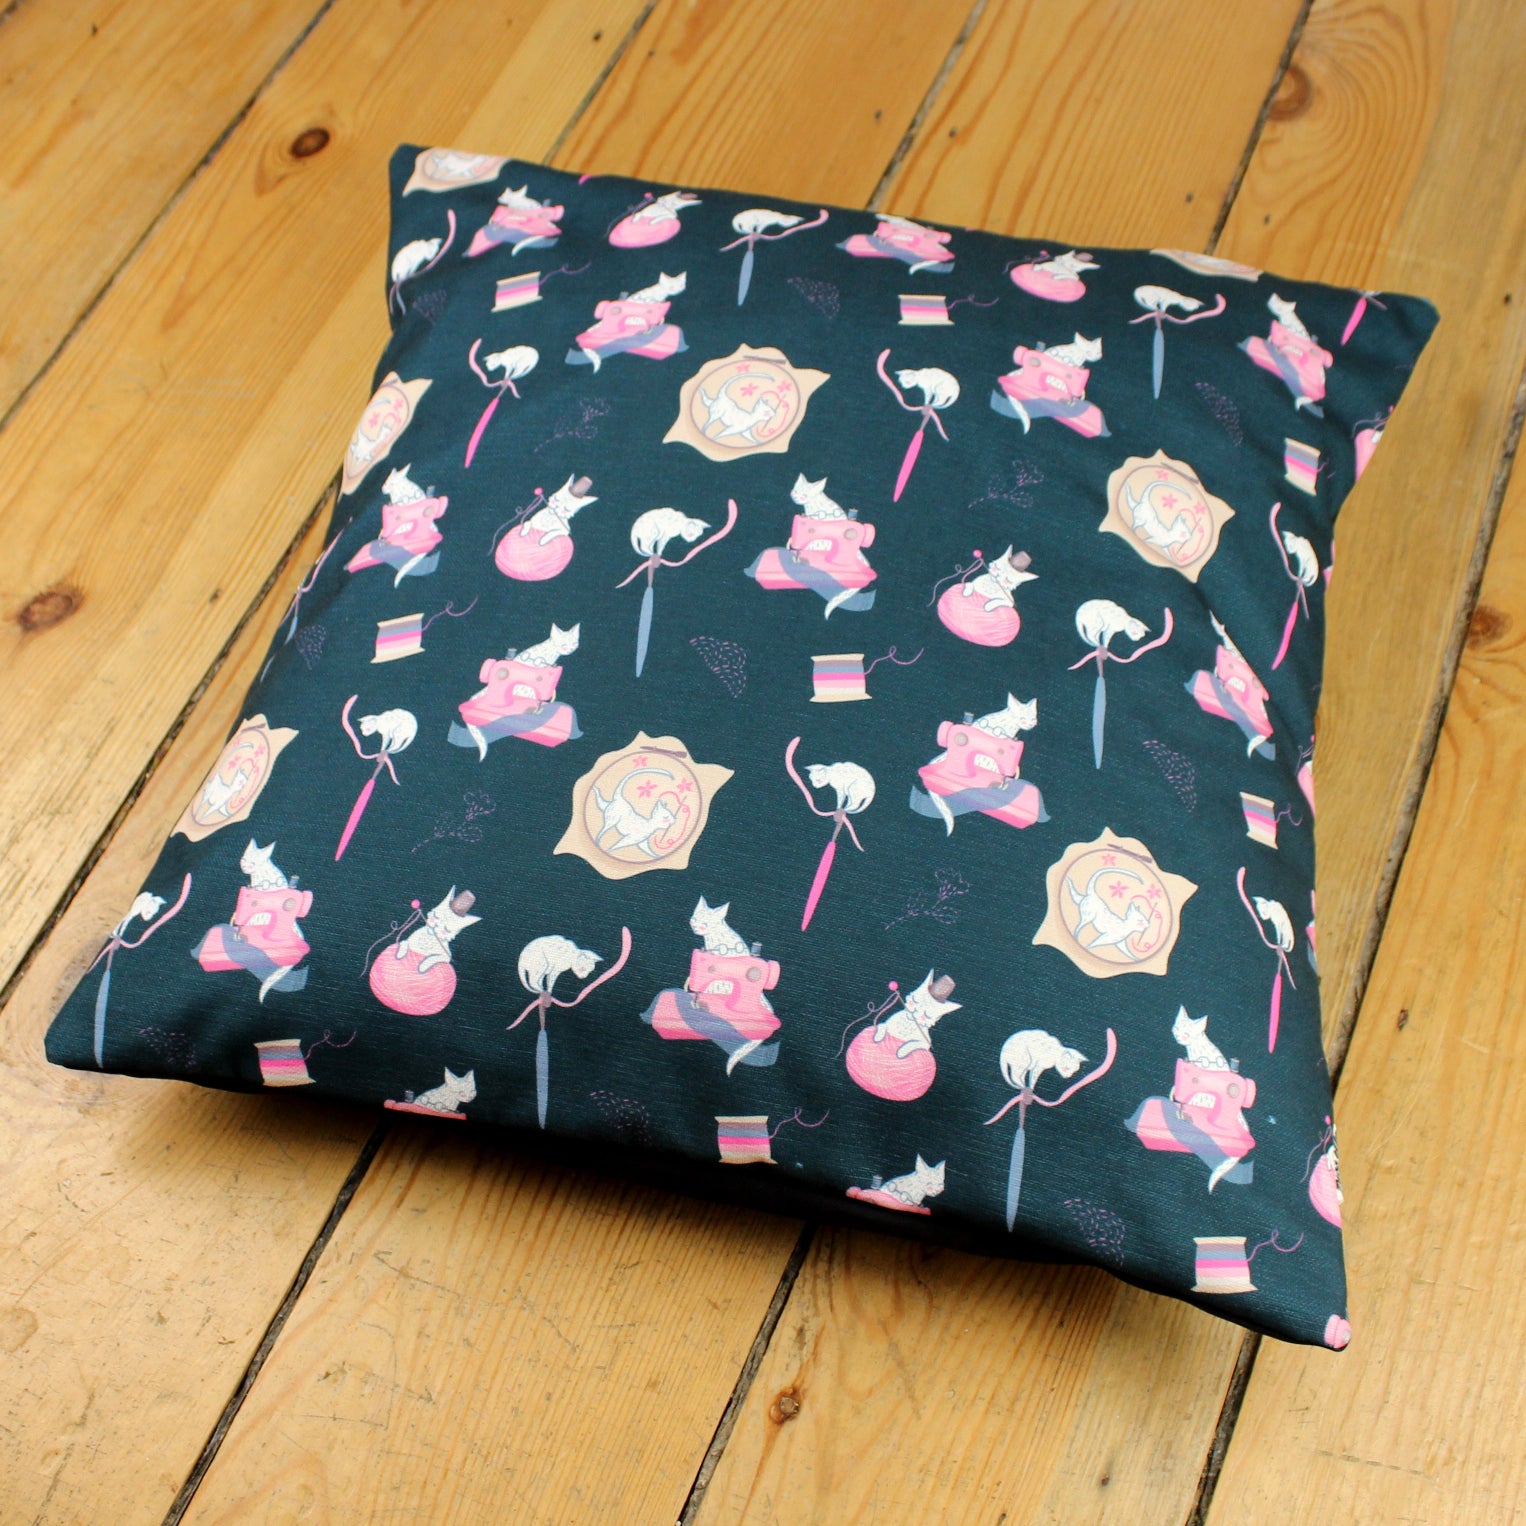 Dark blue Sewing Cats Cushion Cover